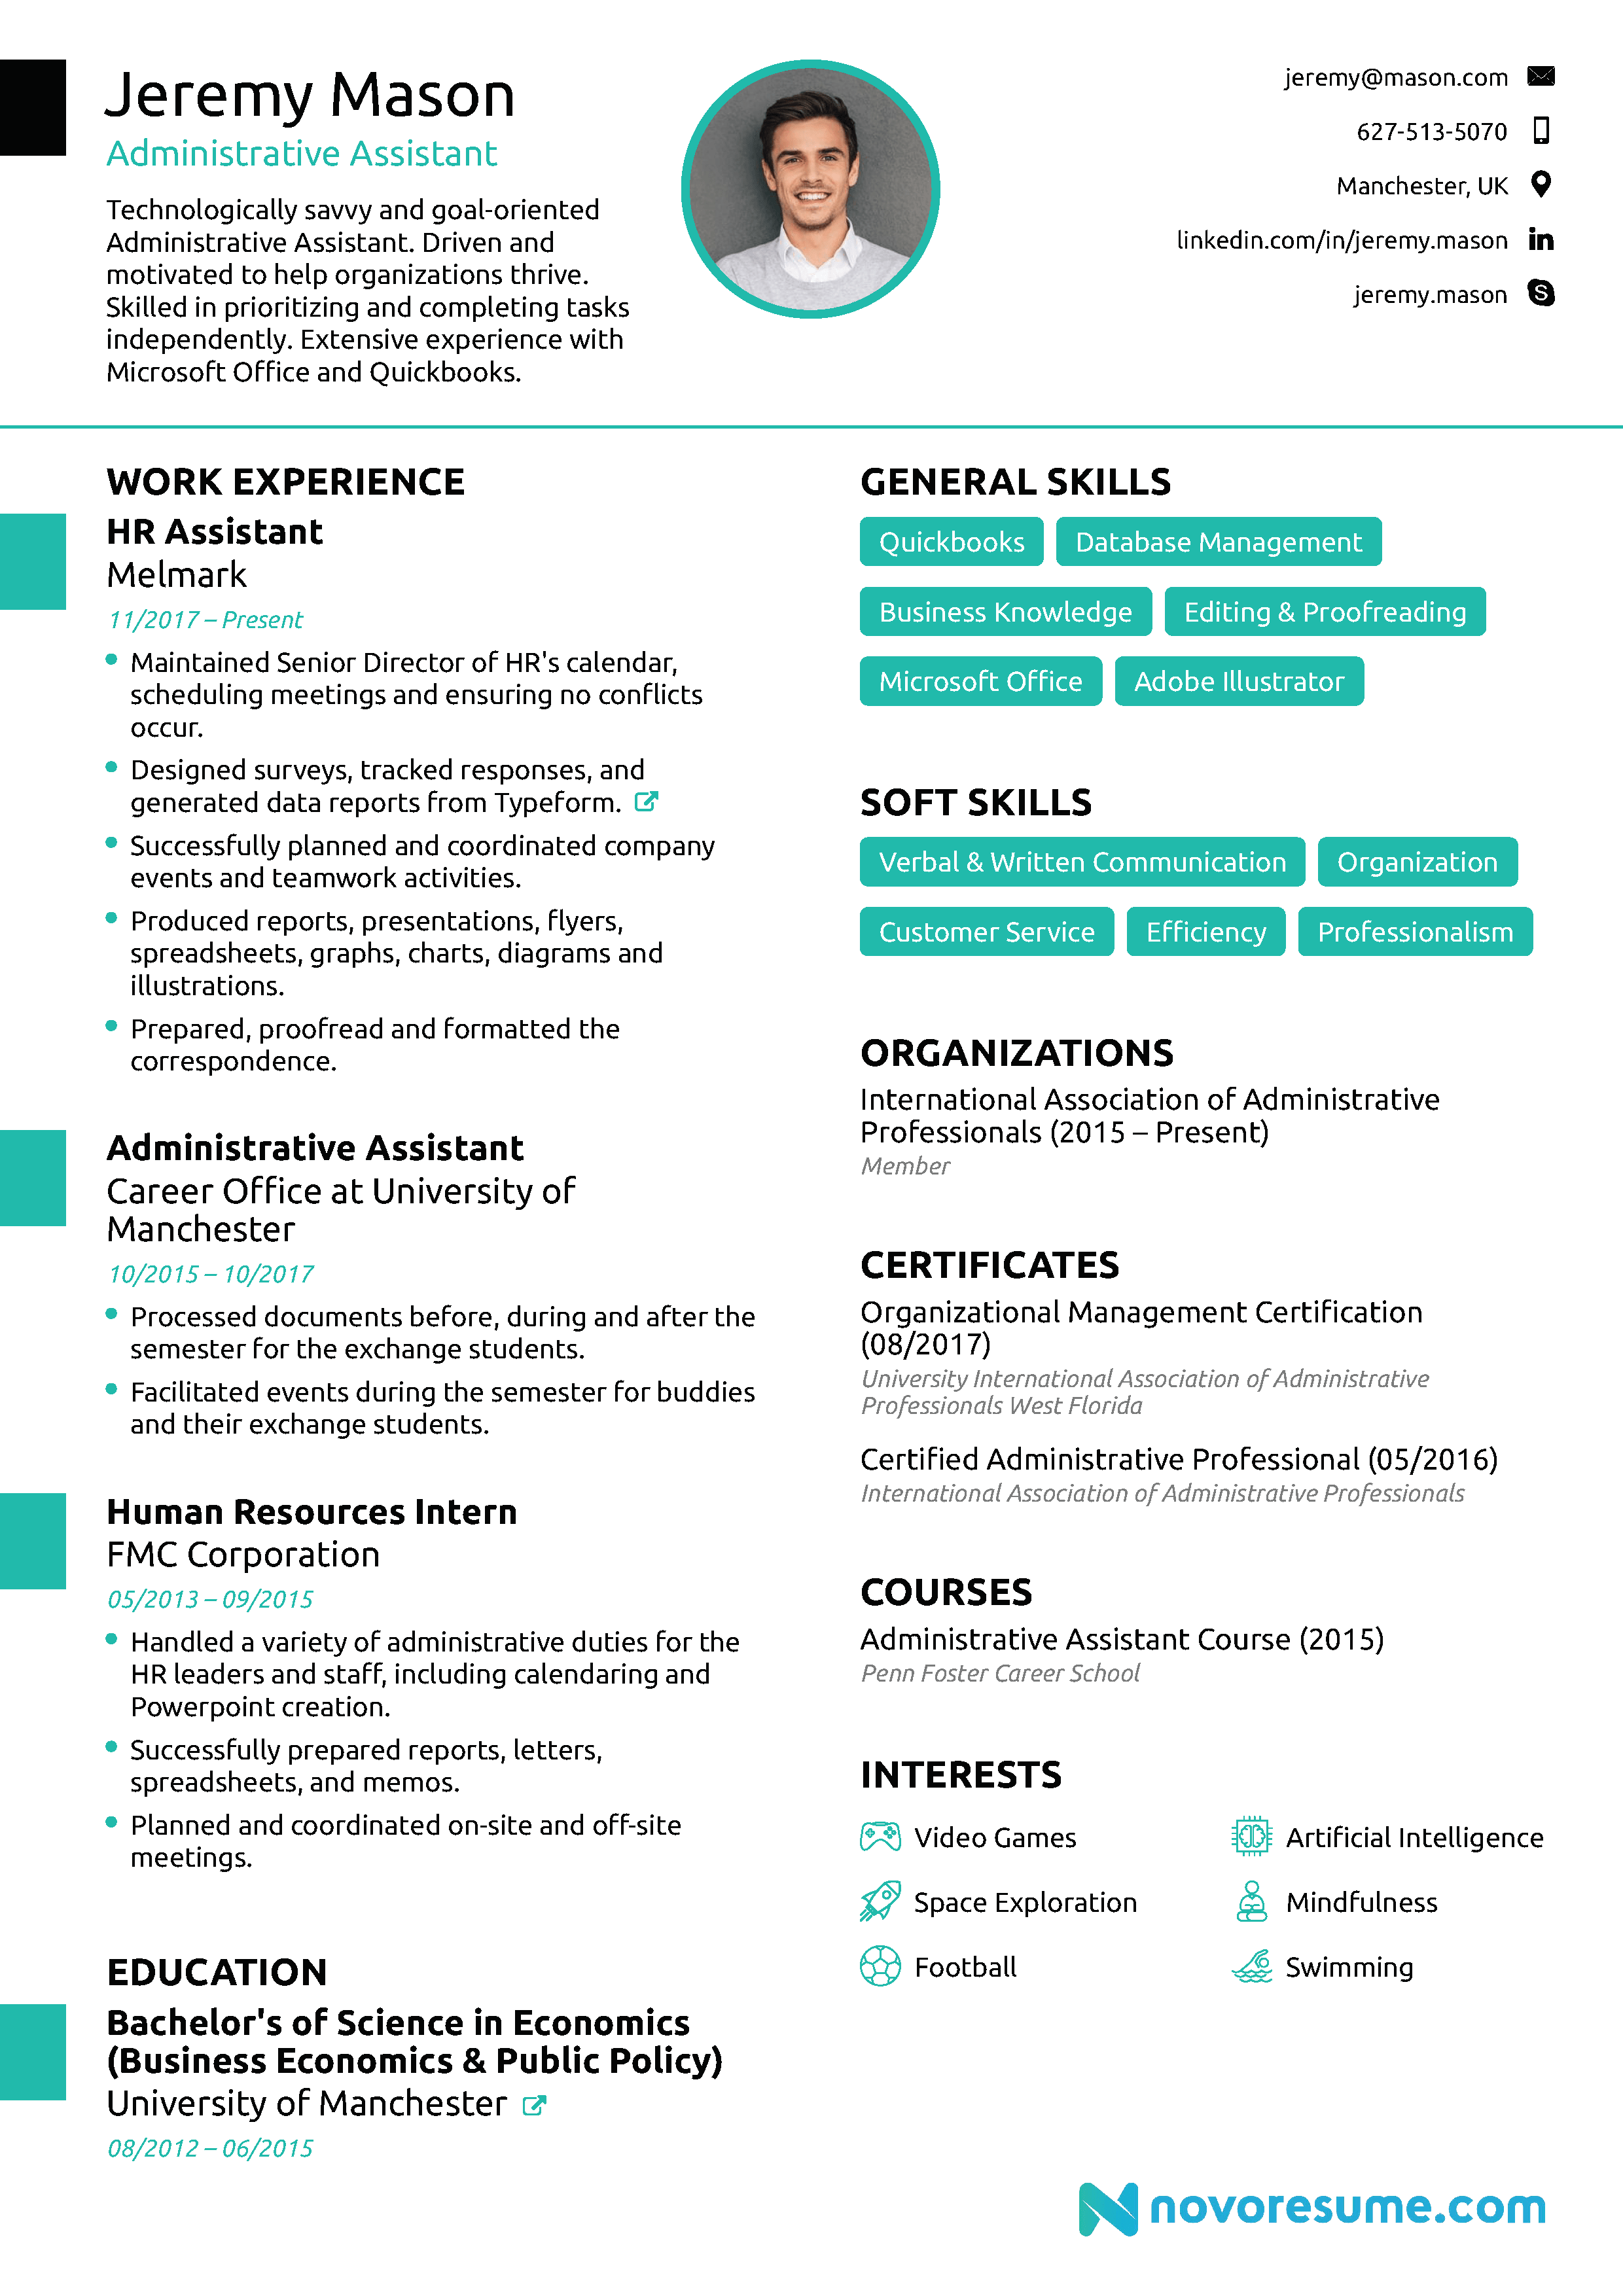 40+ Hobbies &  Interests to Put on a Resume [Updated for 2021]